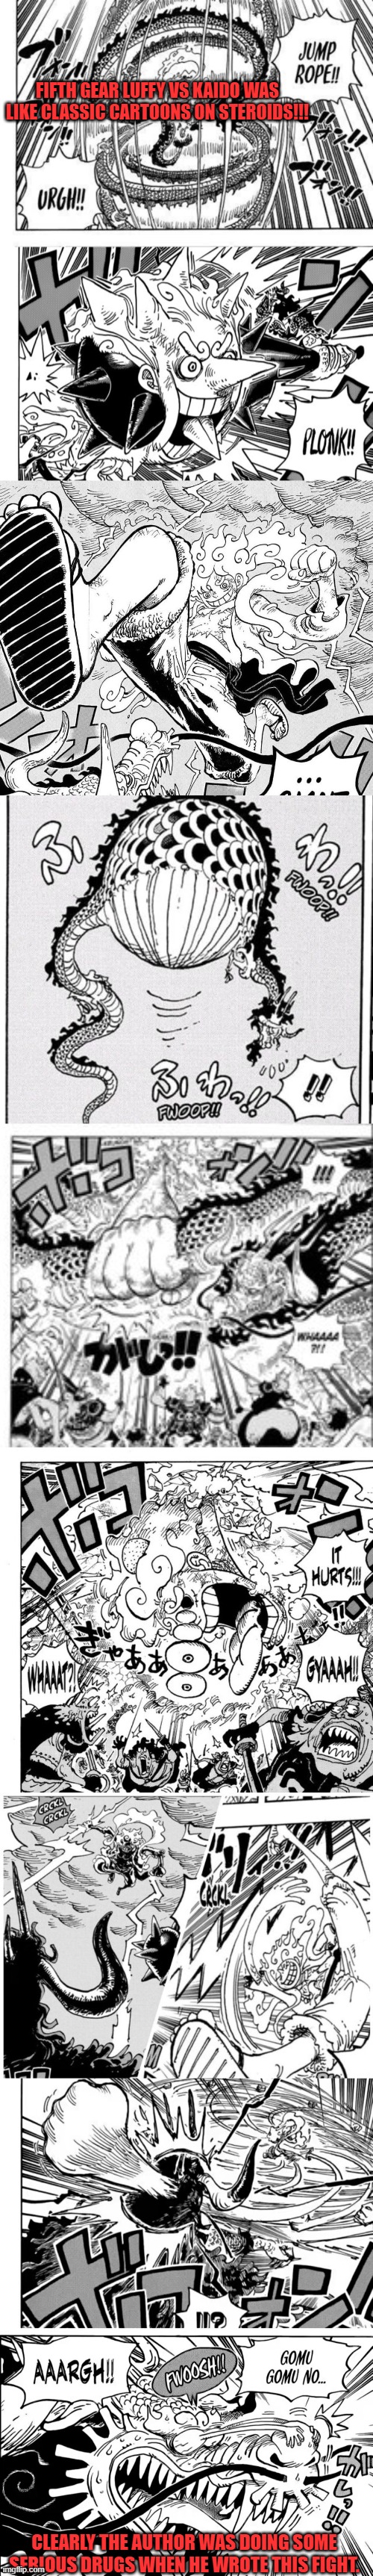  FIFTH GEAR LUFFY VS KAIDO WAS LIKE CLASSIC CARTOONS ON STEROIDS!!! CLEARLY THE AUTHOR WAS DOING SOME SERIOUS DRUGS WHEN HE WROTE THIS FIGHT. | image tagged in one piece,cartoons,luffy,ridiculous,drugs | made w/ Imgflip meme maker